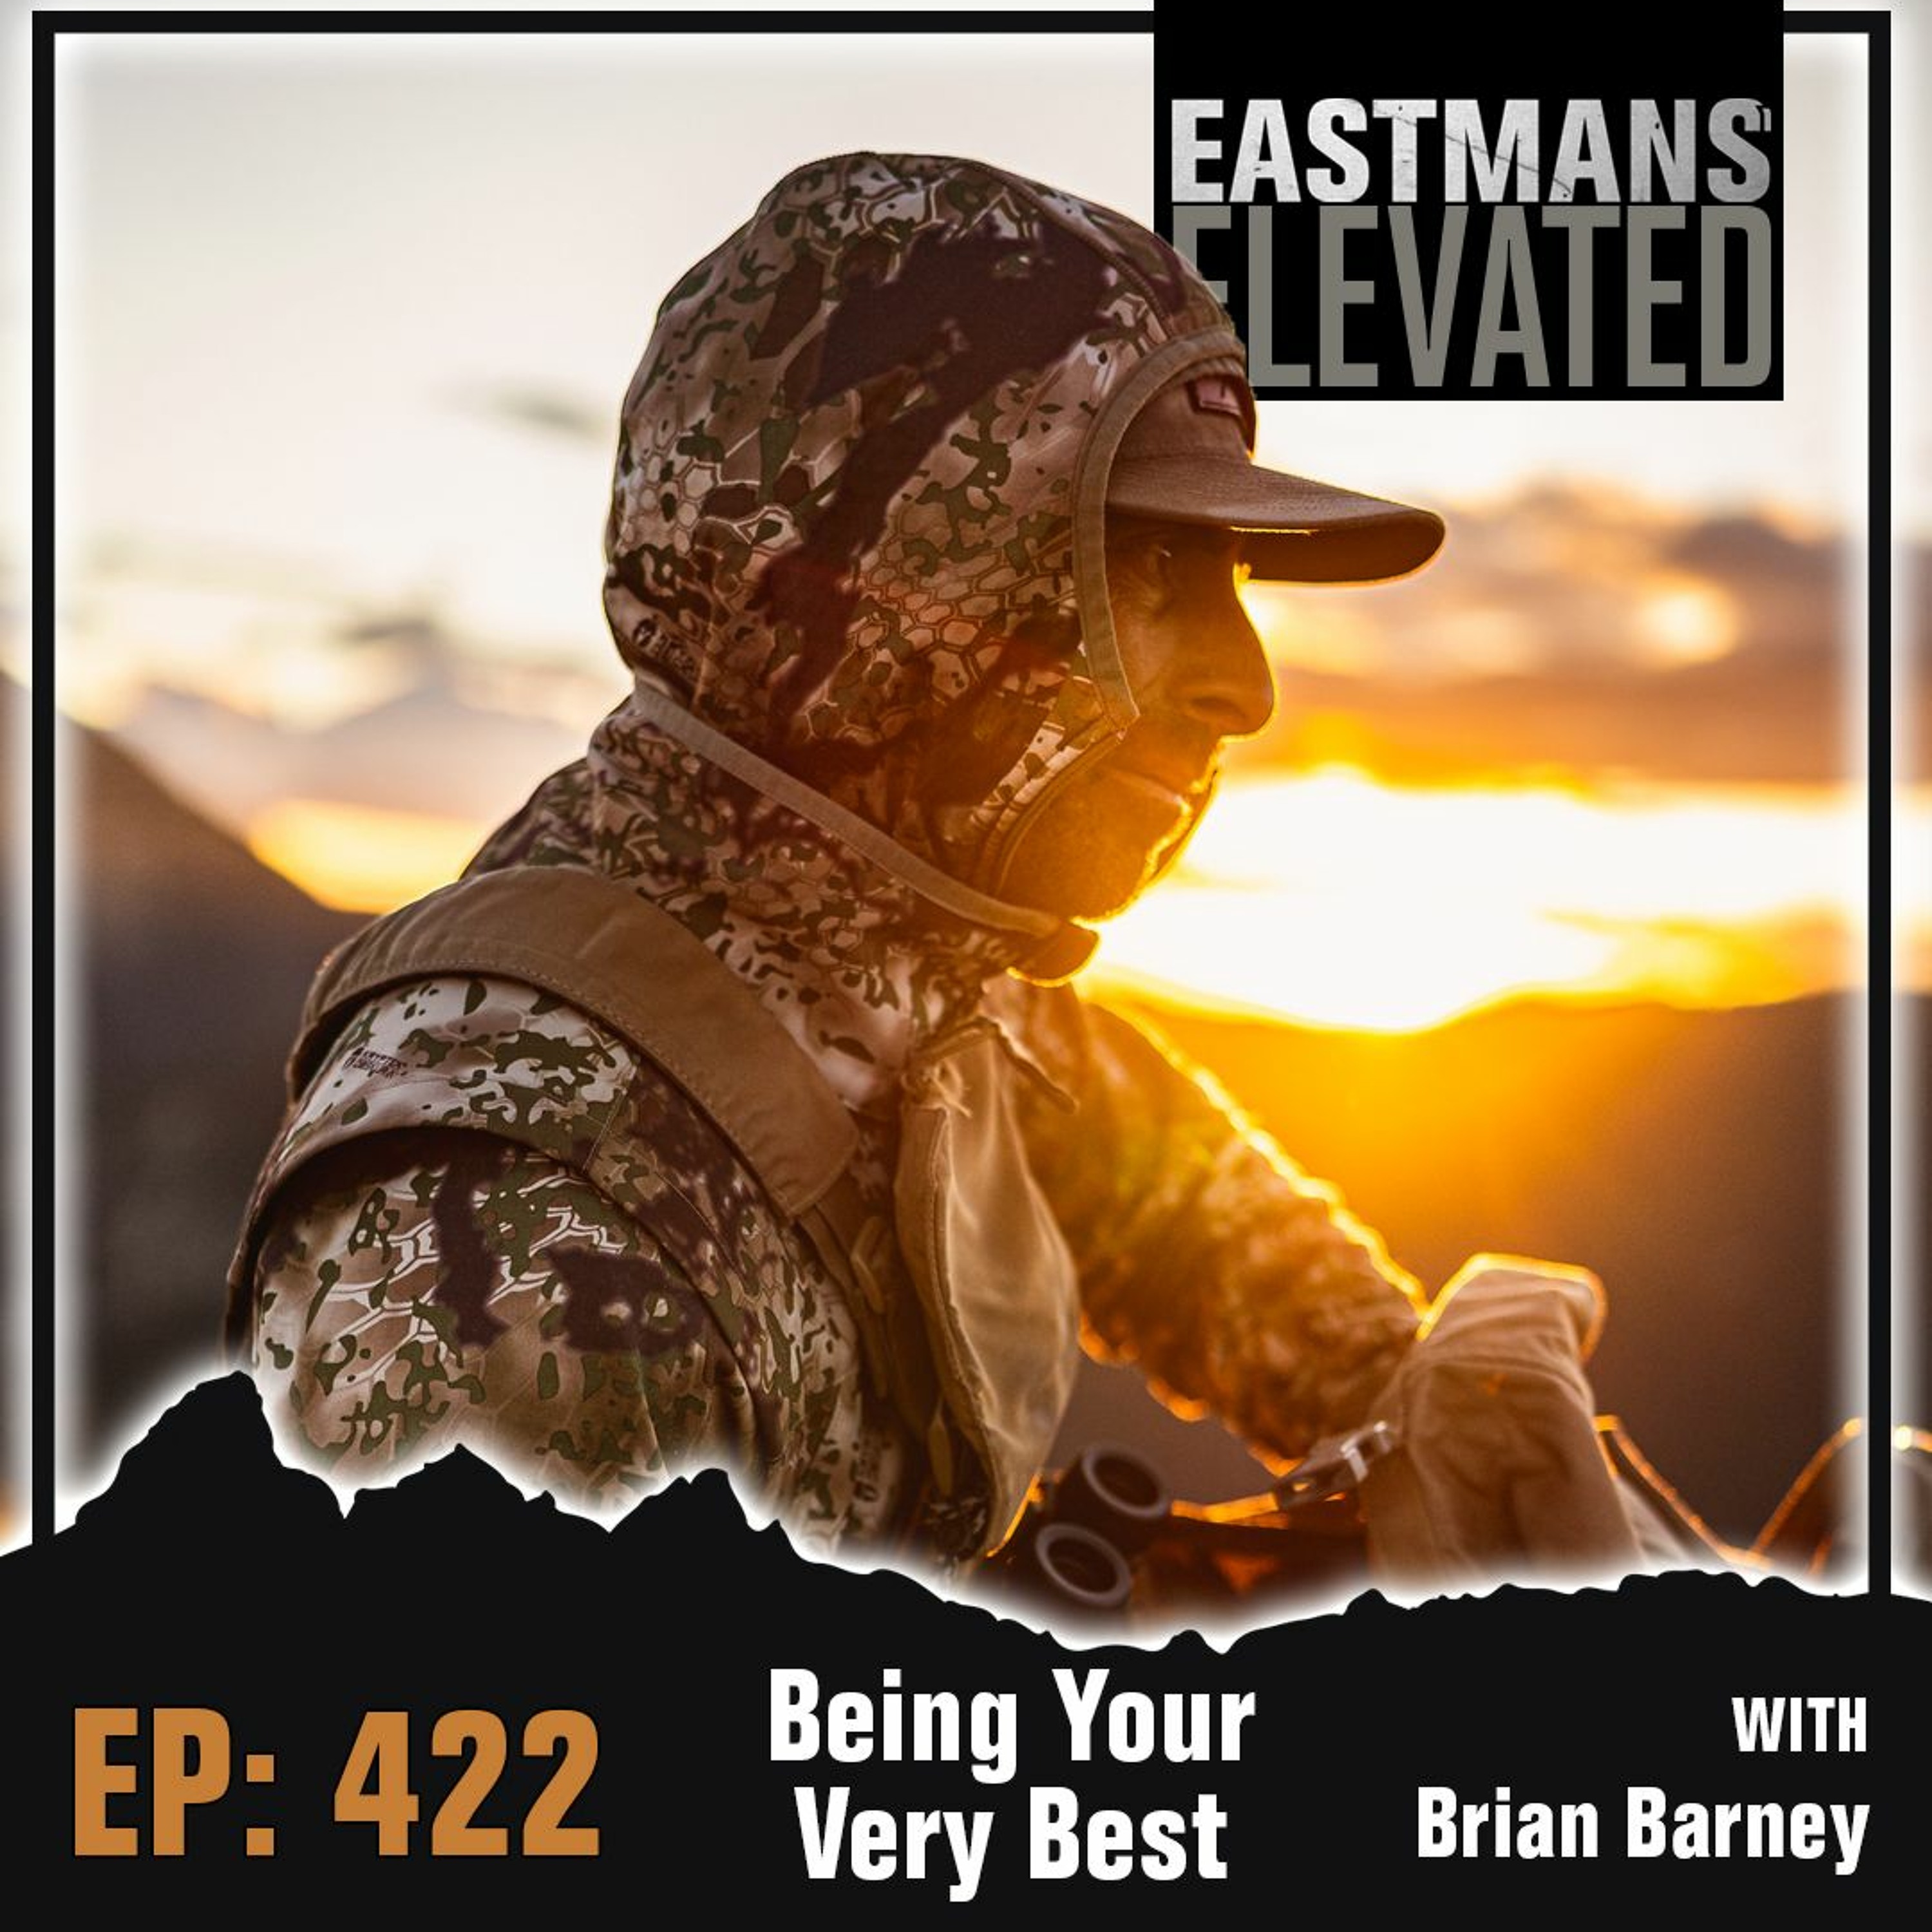 Episode 422: Being Your Very Best Solo With Brian Barney